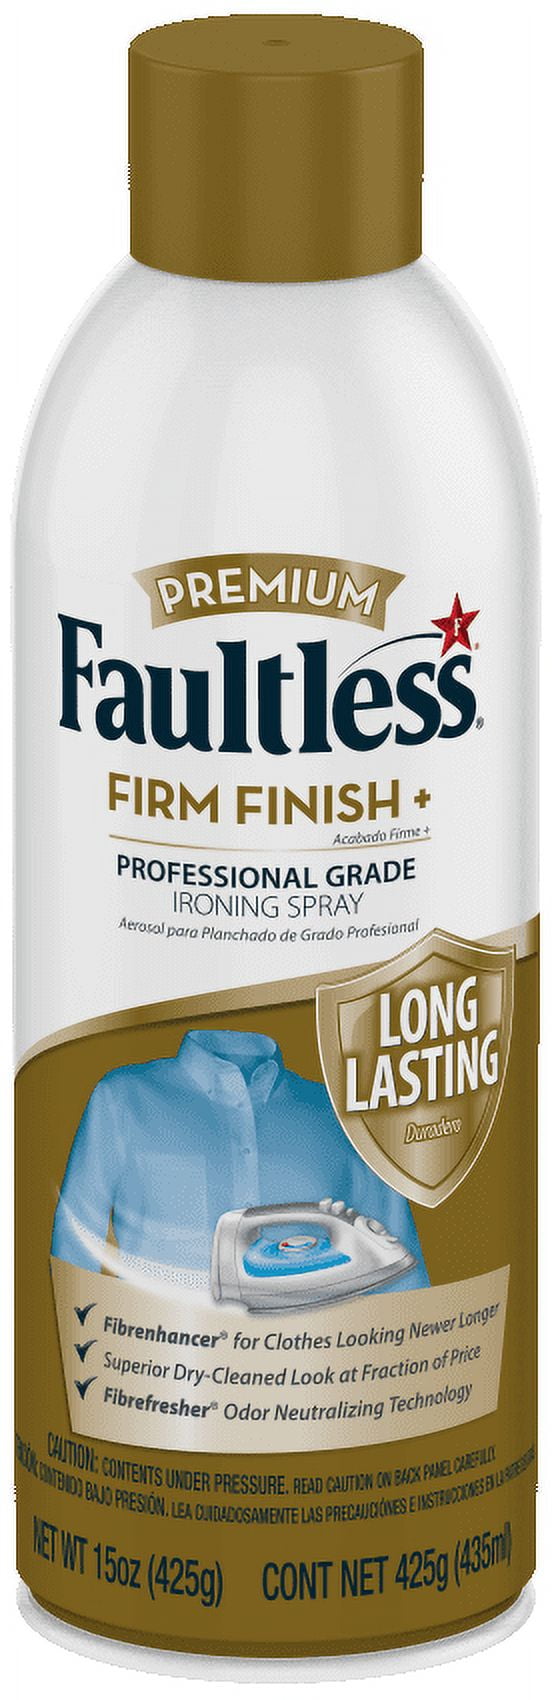 Faultless Iron Cleaner .17oz Tube Twin Pack